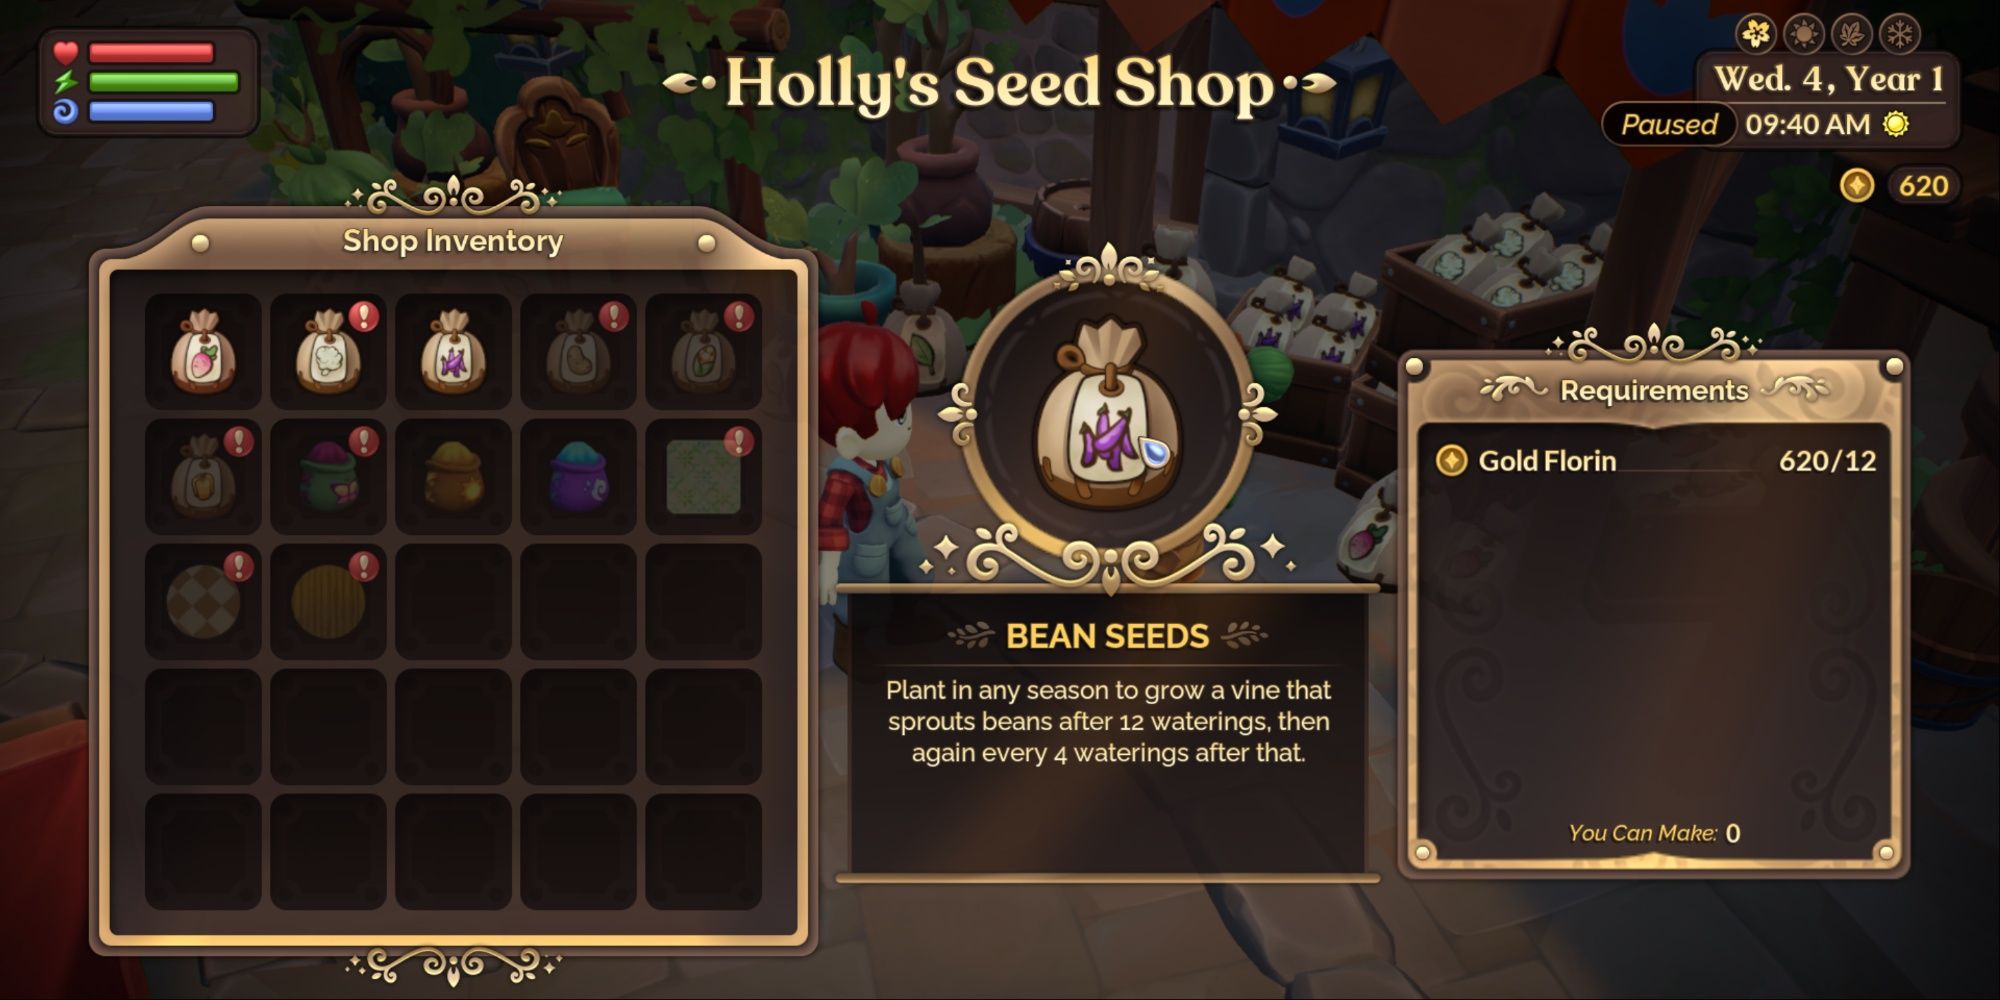 Fae Farm holly's seed shop interface displaying bean seeds for 12 florins each